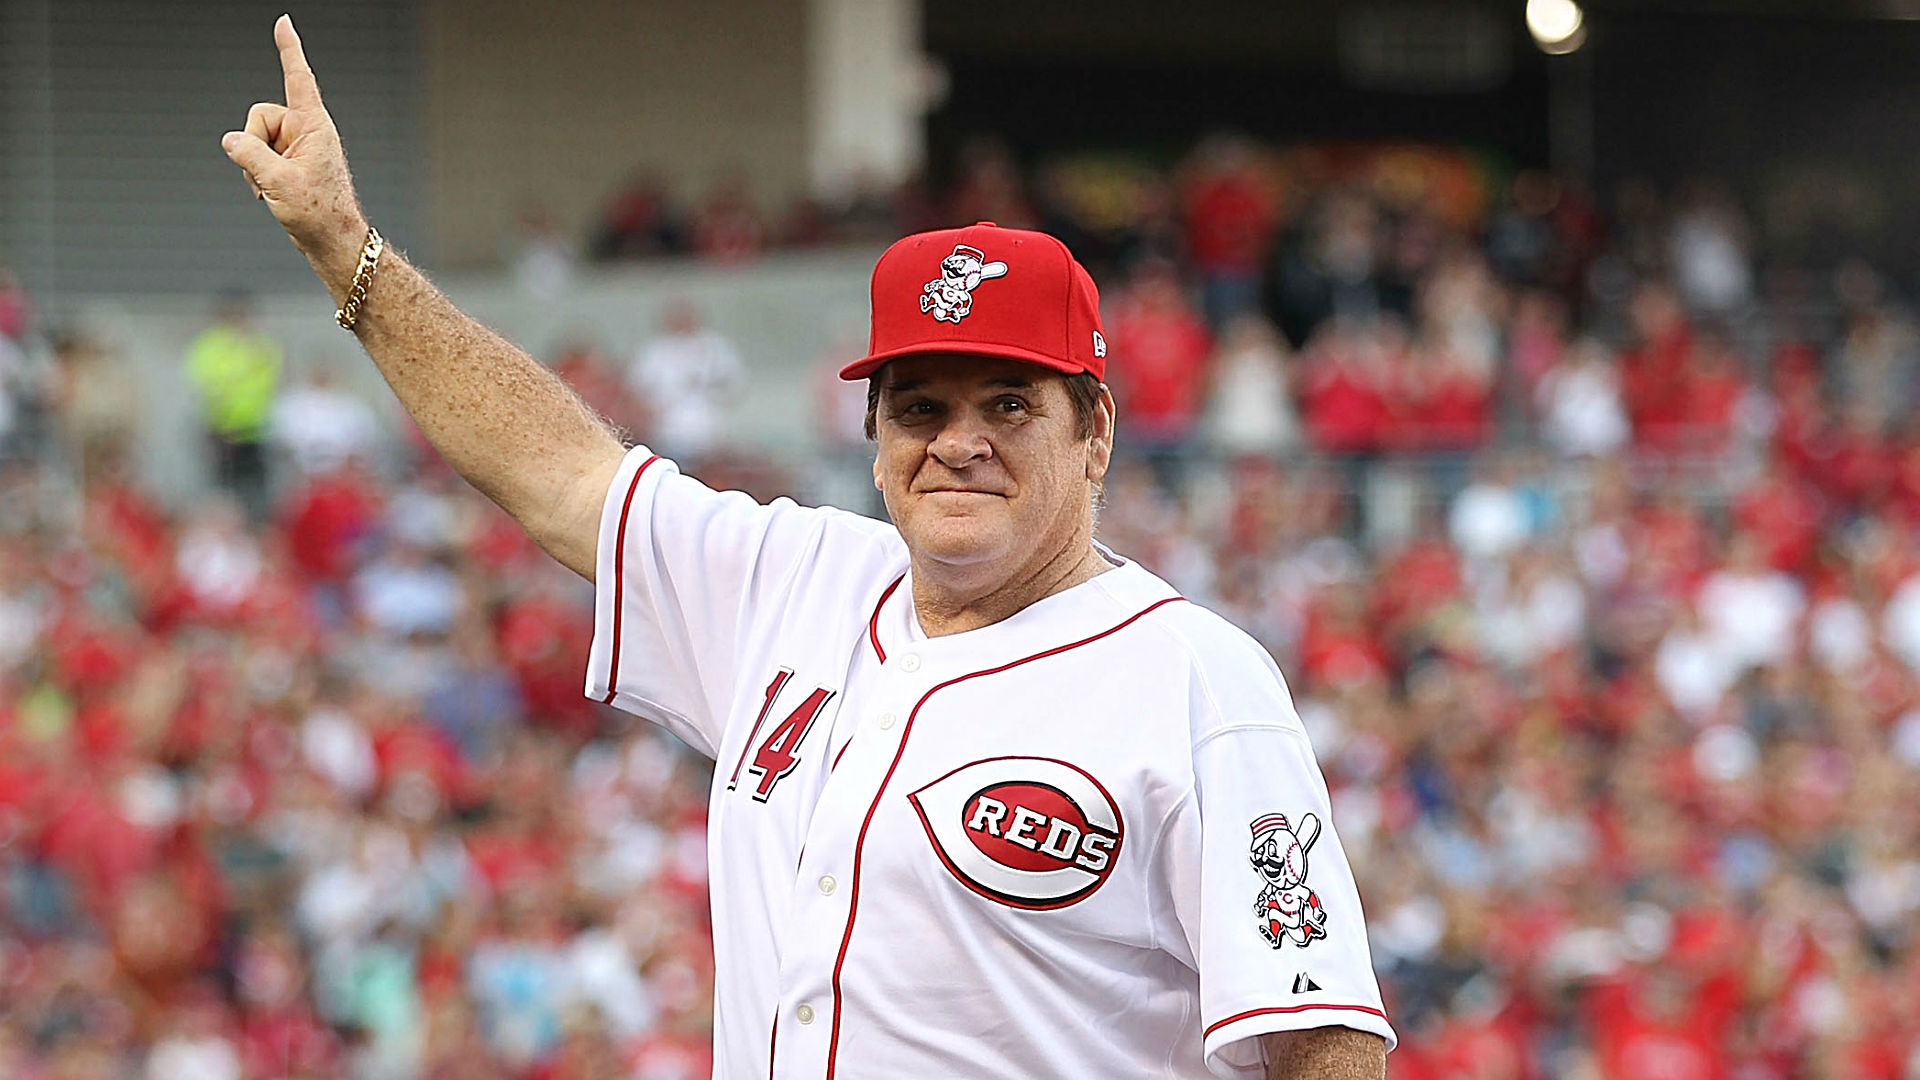 Pete Rose makes official request for reinstatement